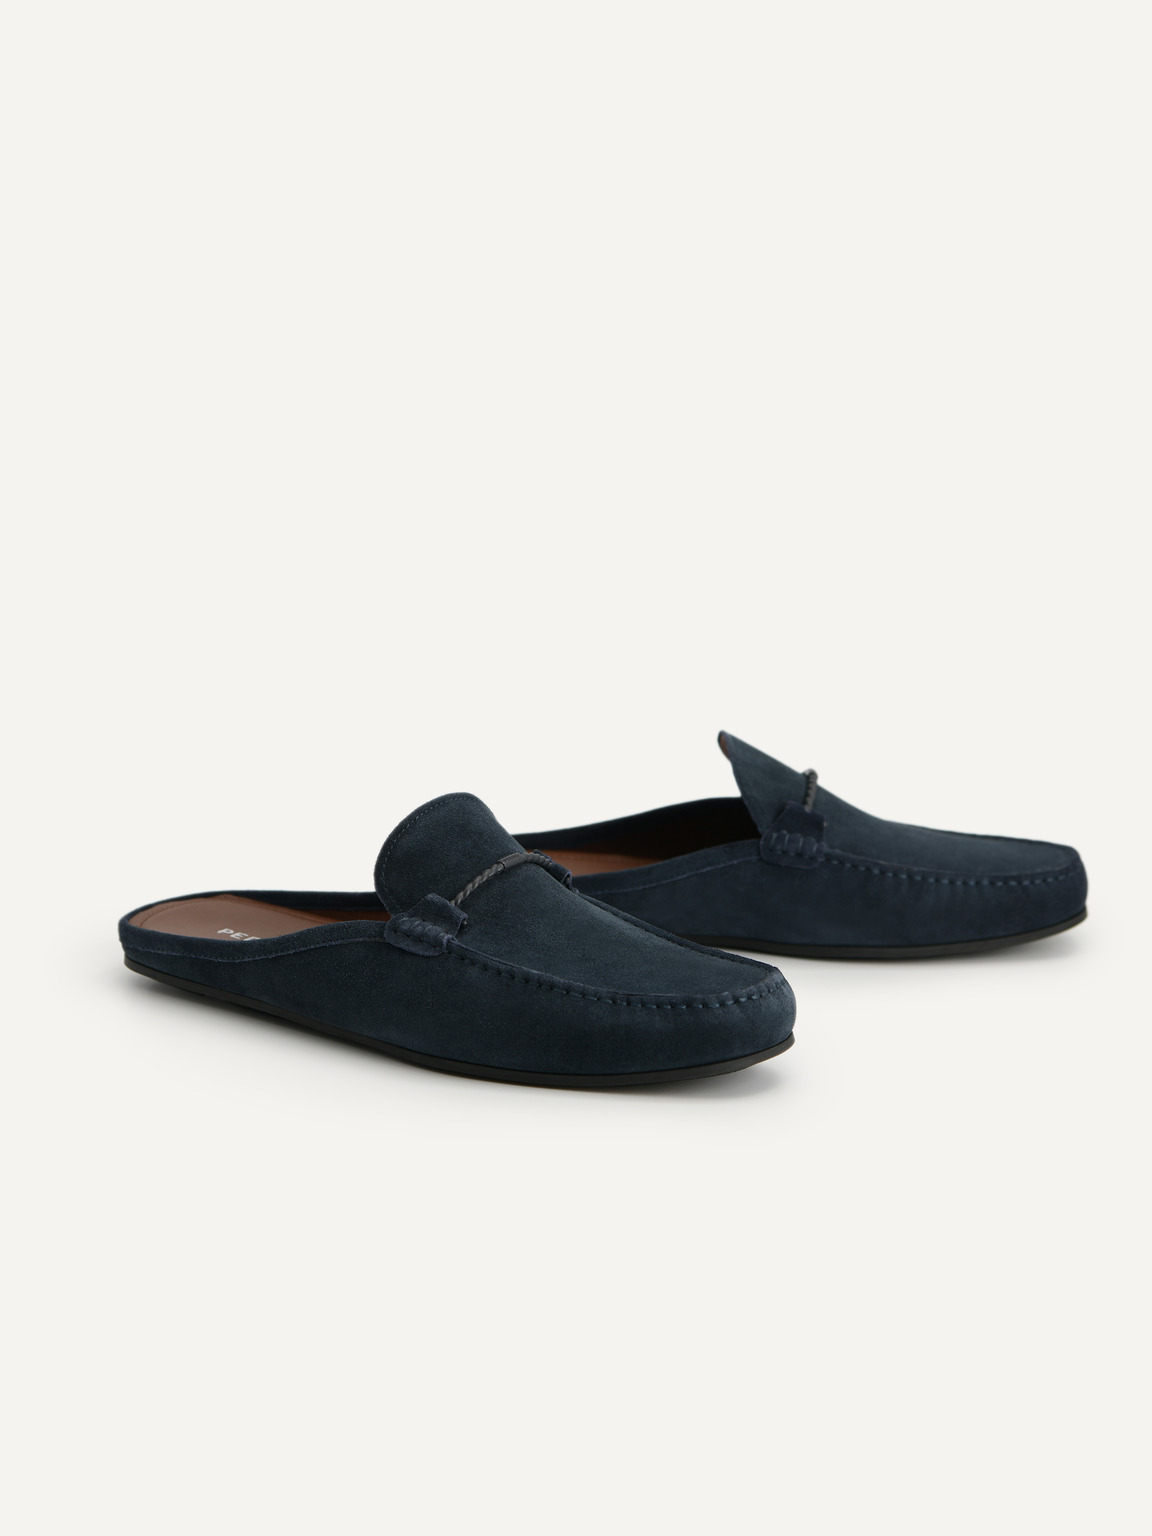 Leather Slip-On Driving Shoe, Navy